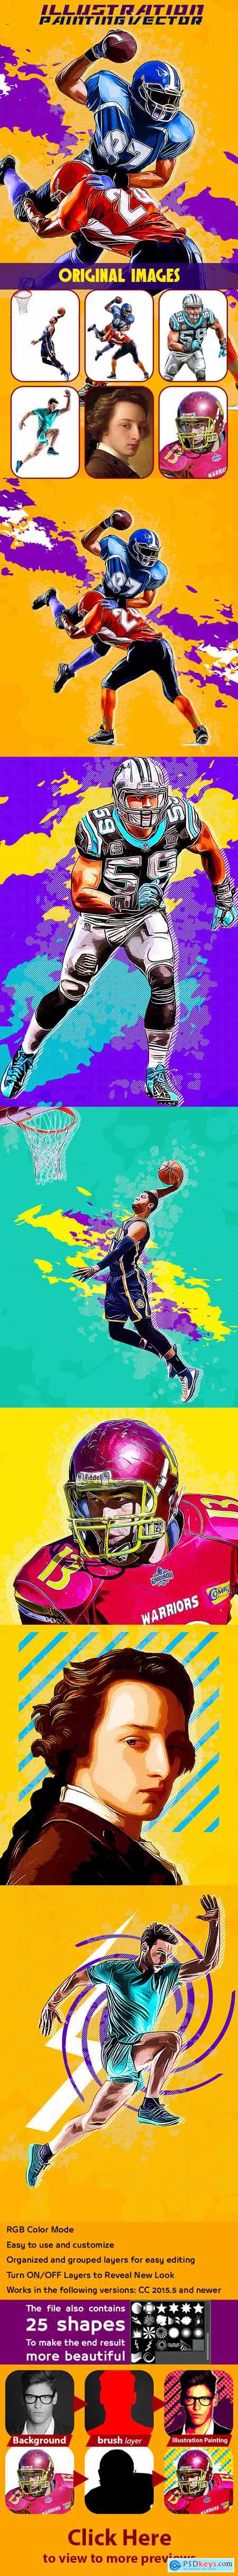 Illustration Painting Vector Action 26581141